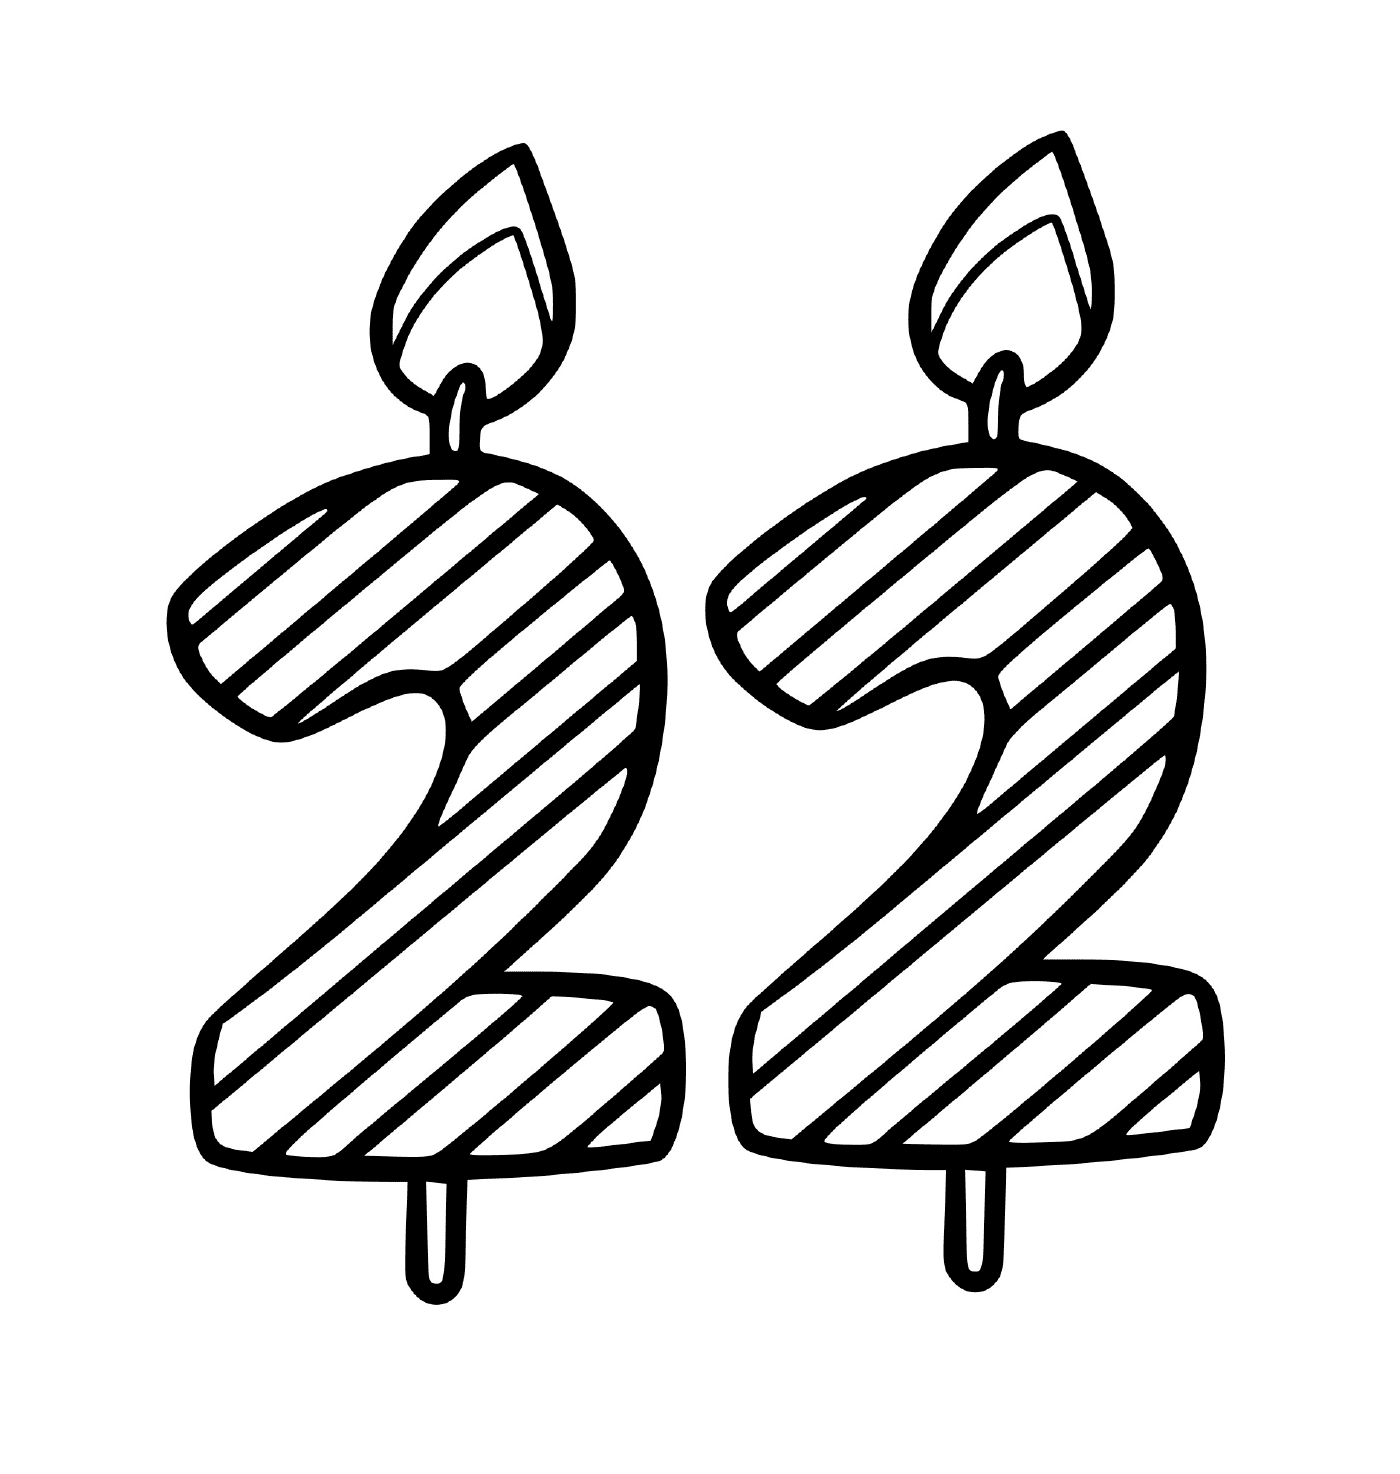  A candle in the shape of the twenty-two 